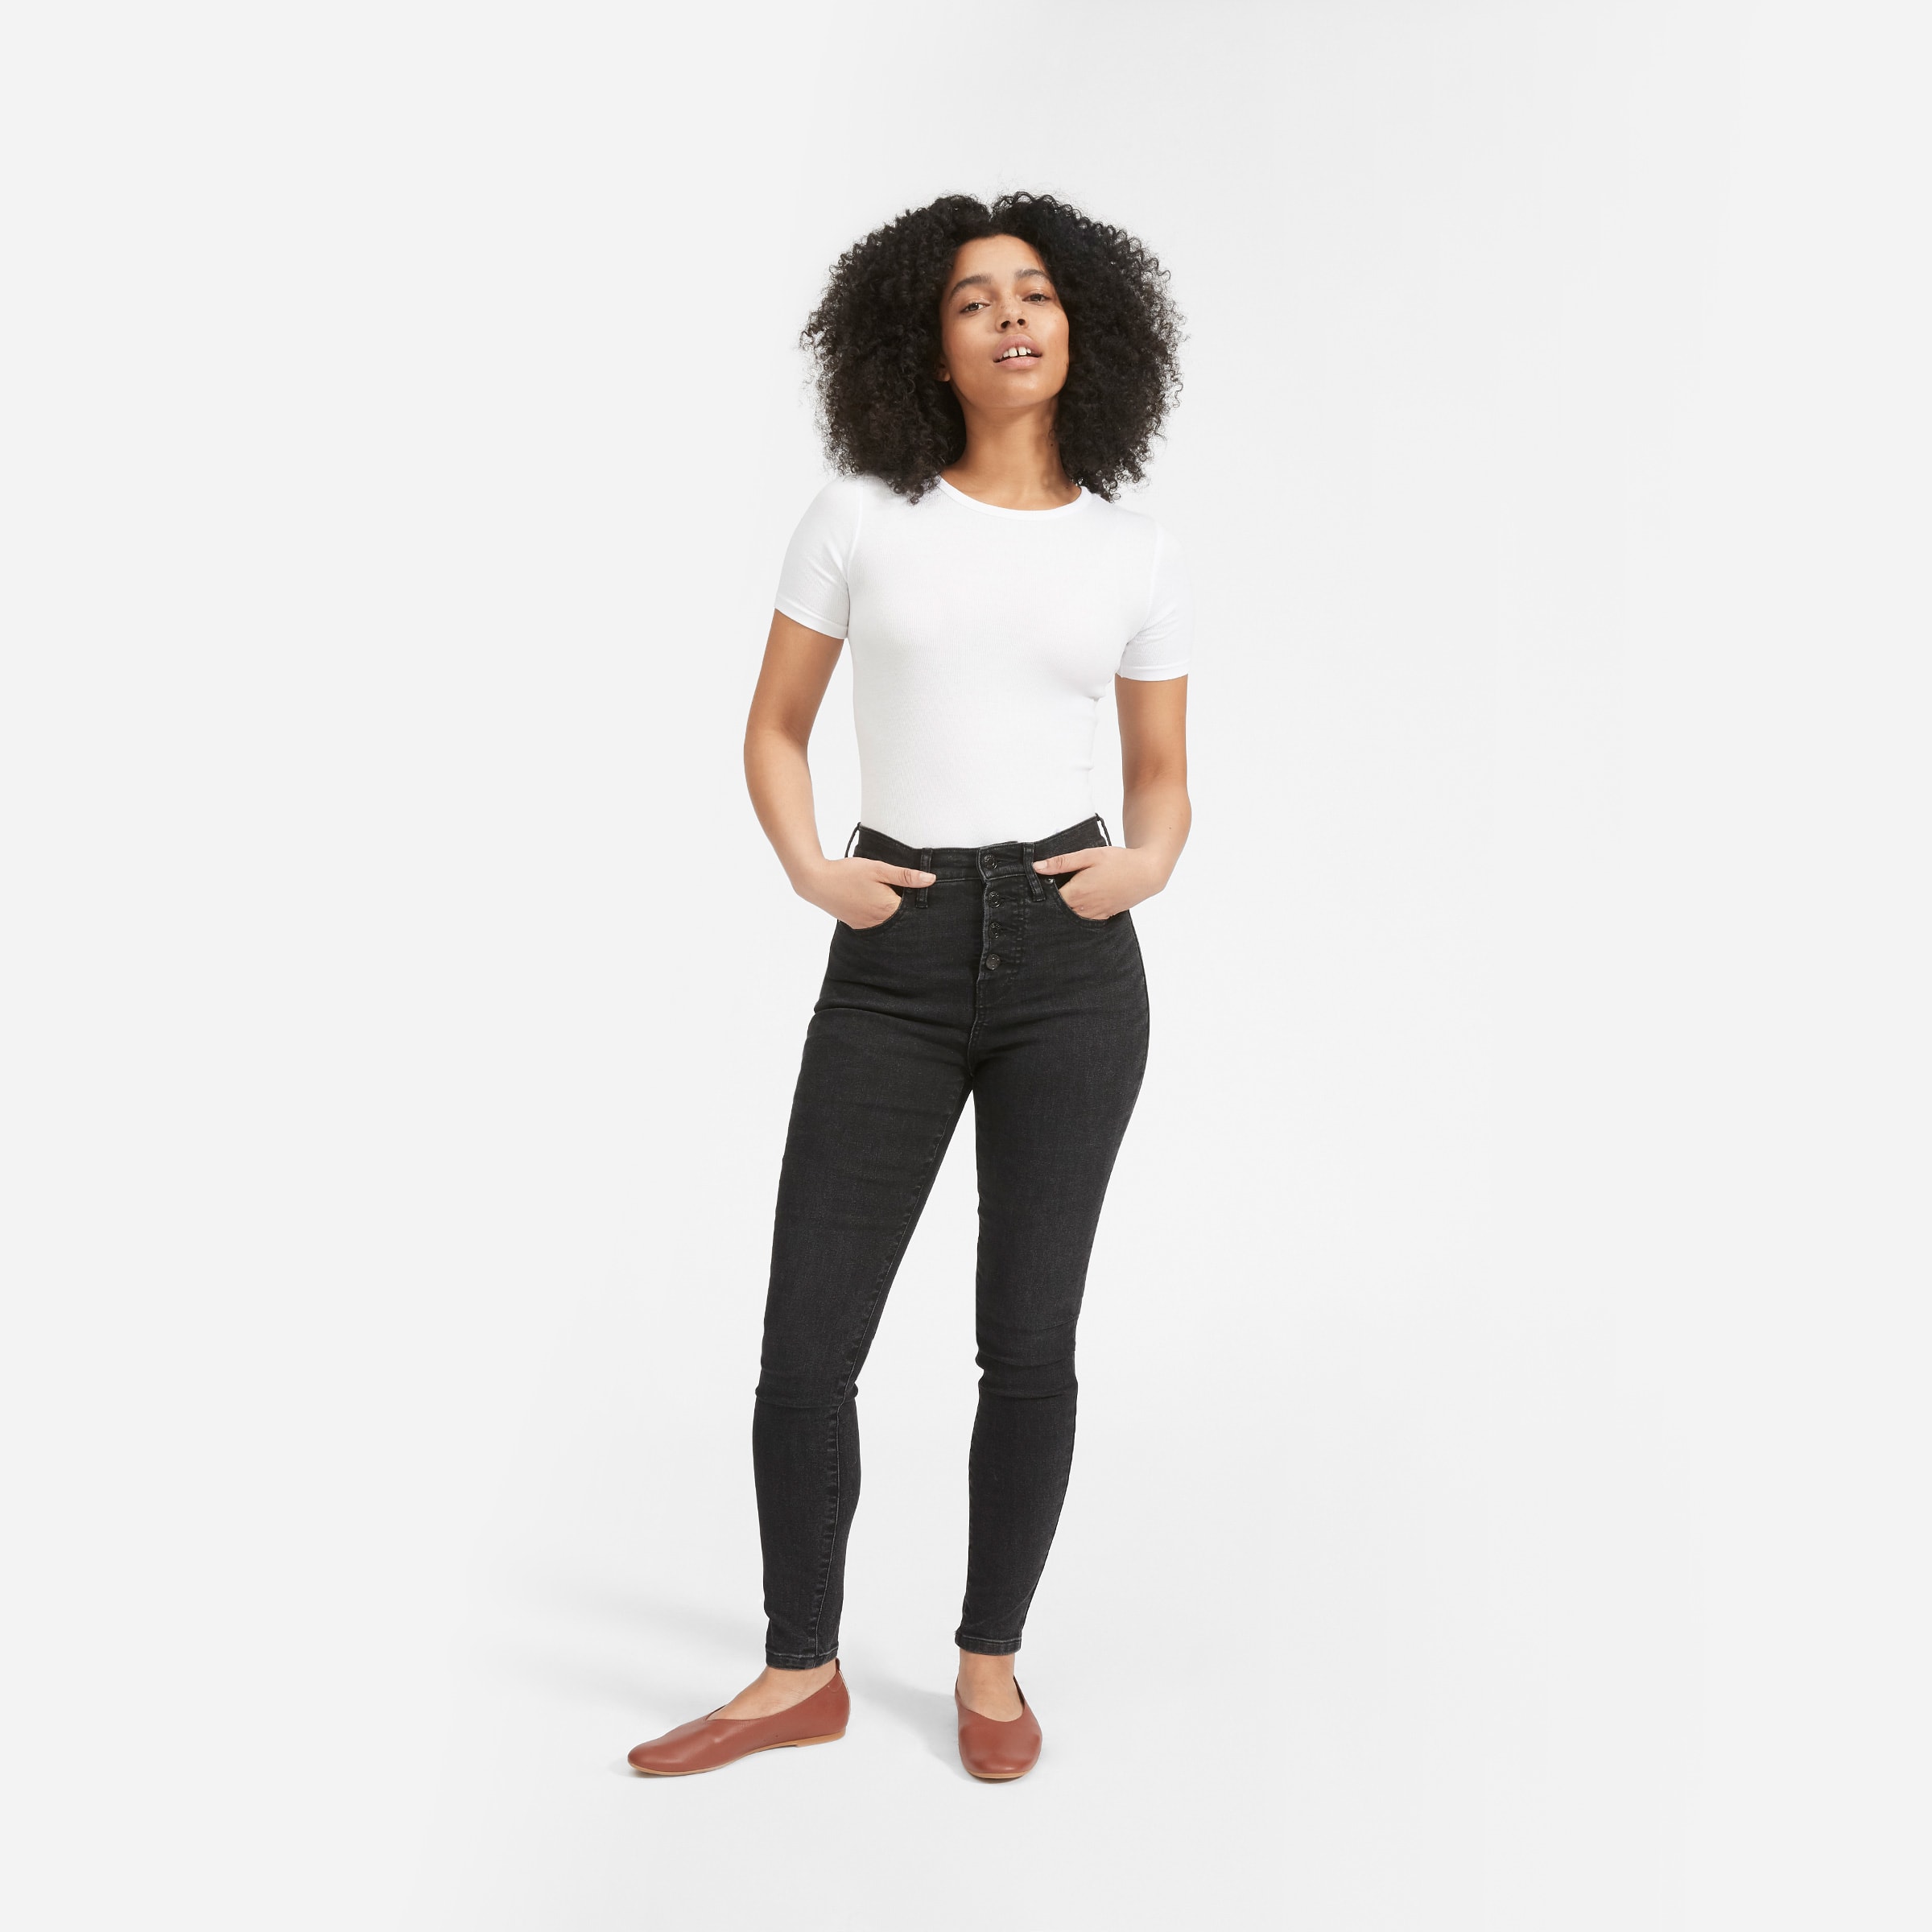 3 button high waisted black jeans